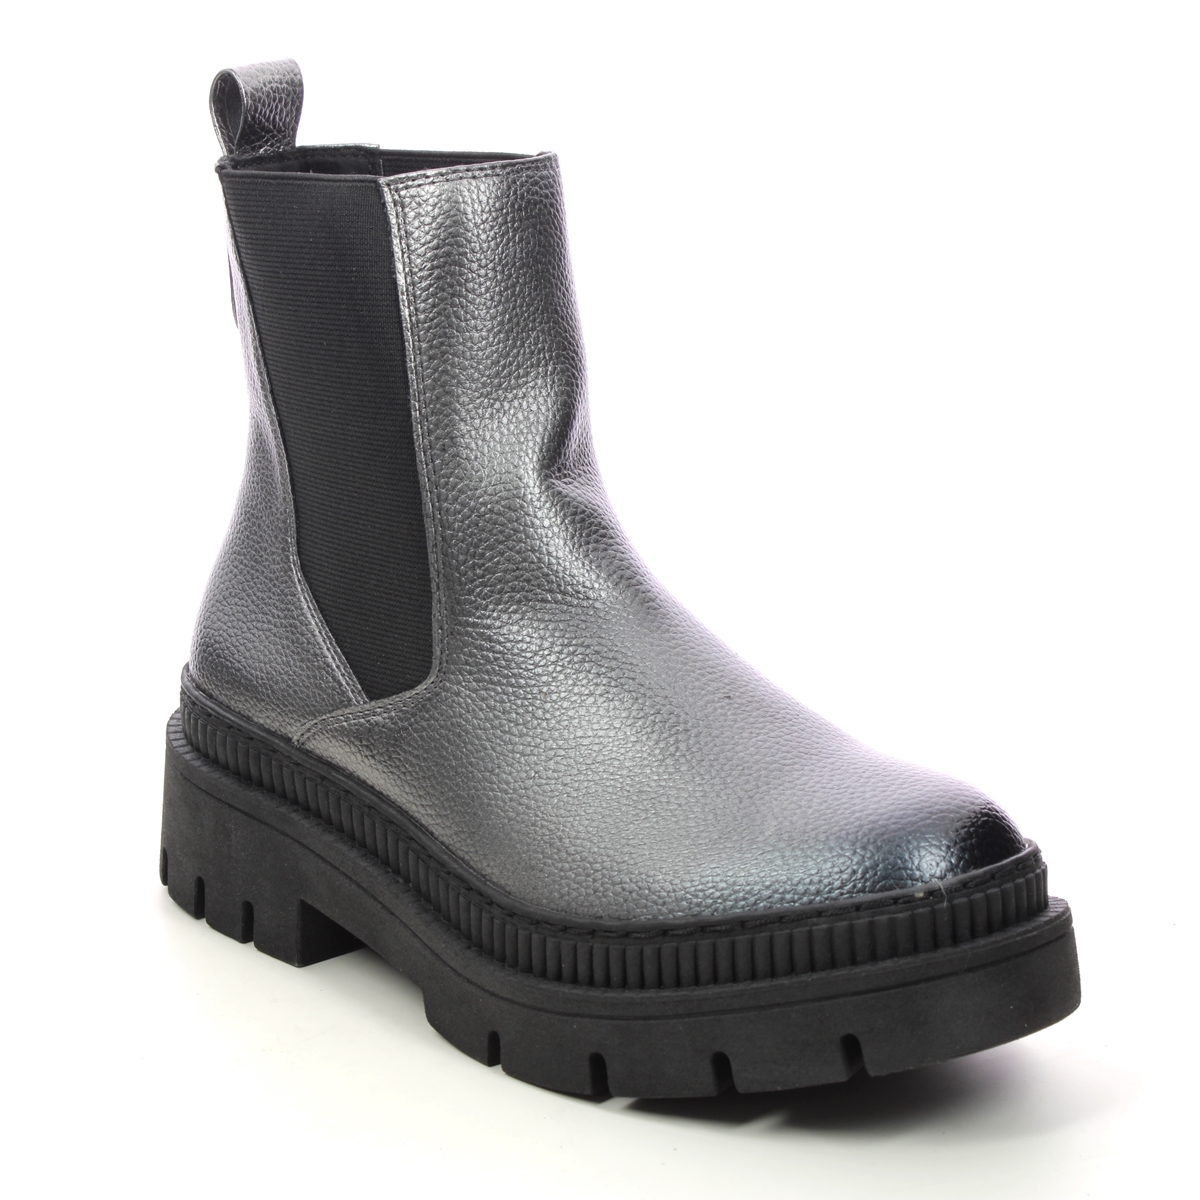 Marco Tozzi Rostra Chelsea Pewter Womens Chelsea Boots 25822-41-915 In Size 38 In Plain Pewter